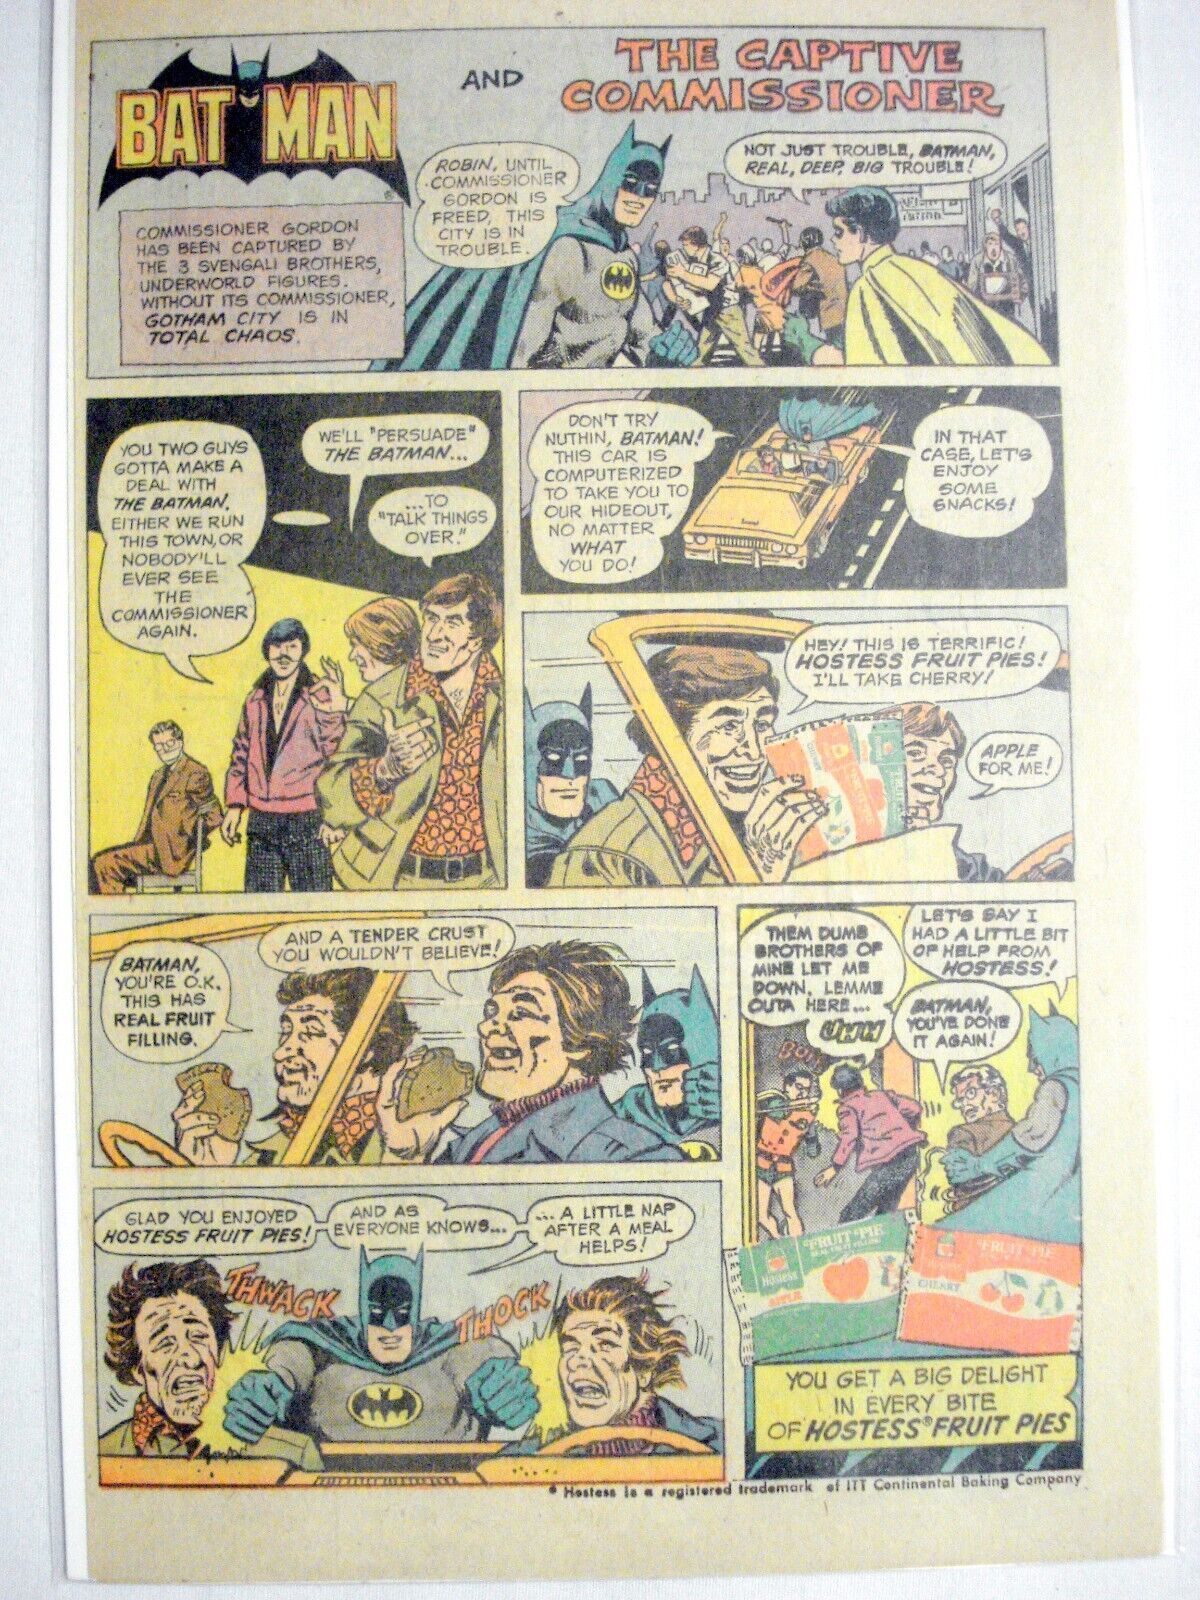 1976 Ad Batman and the Captive Commissioner Hostess Fruit Pies - $7.99